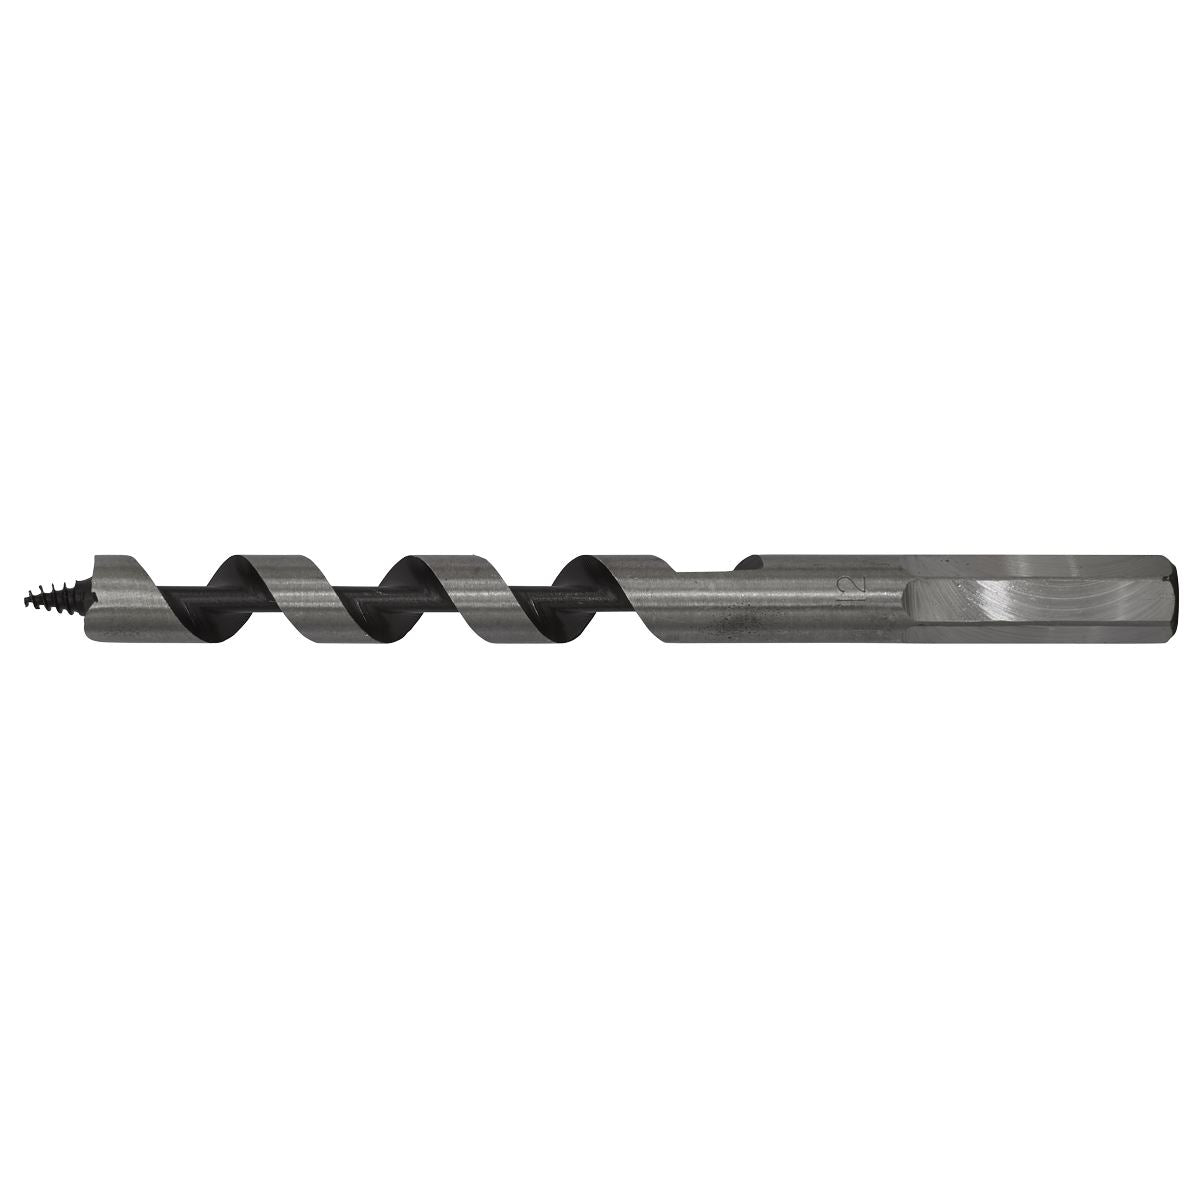 Worksafe by Sealey Auger Wood Drill Bit 12mm x 155mm